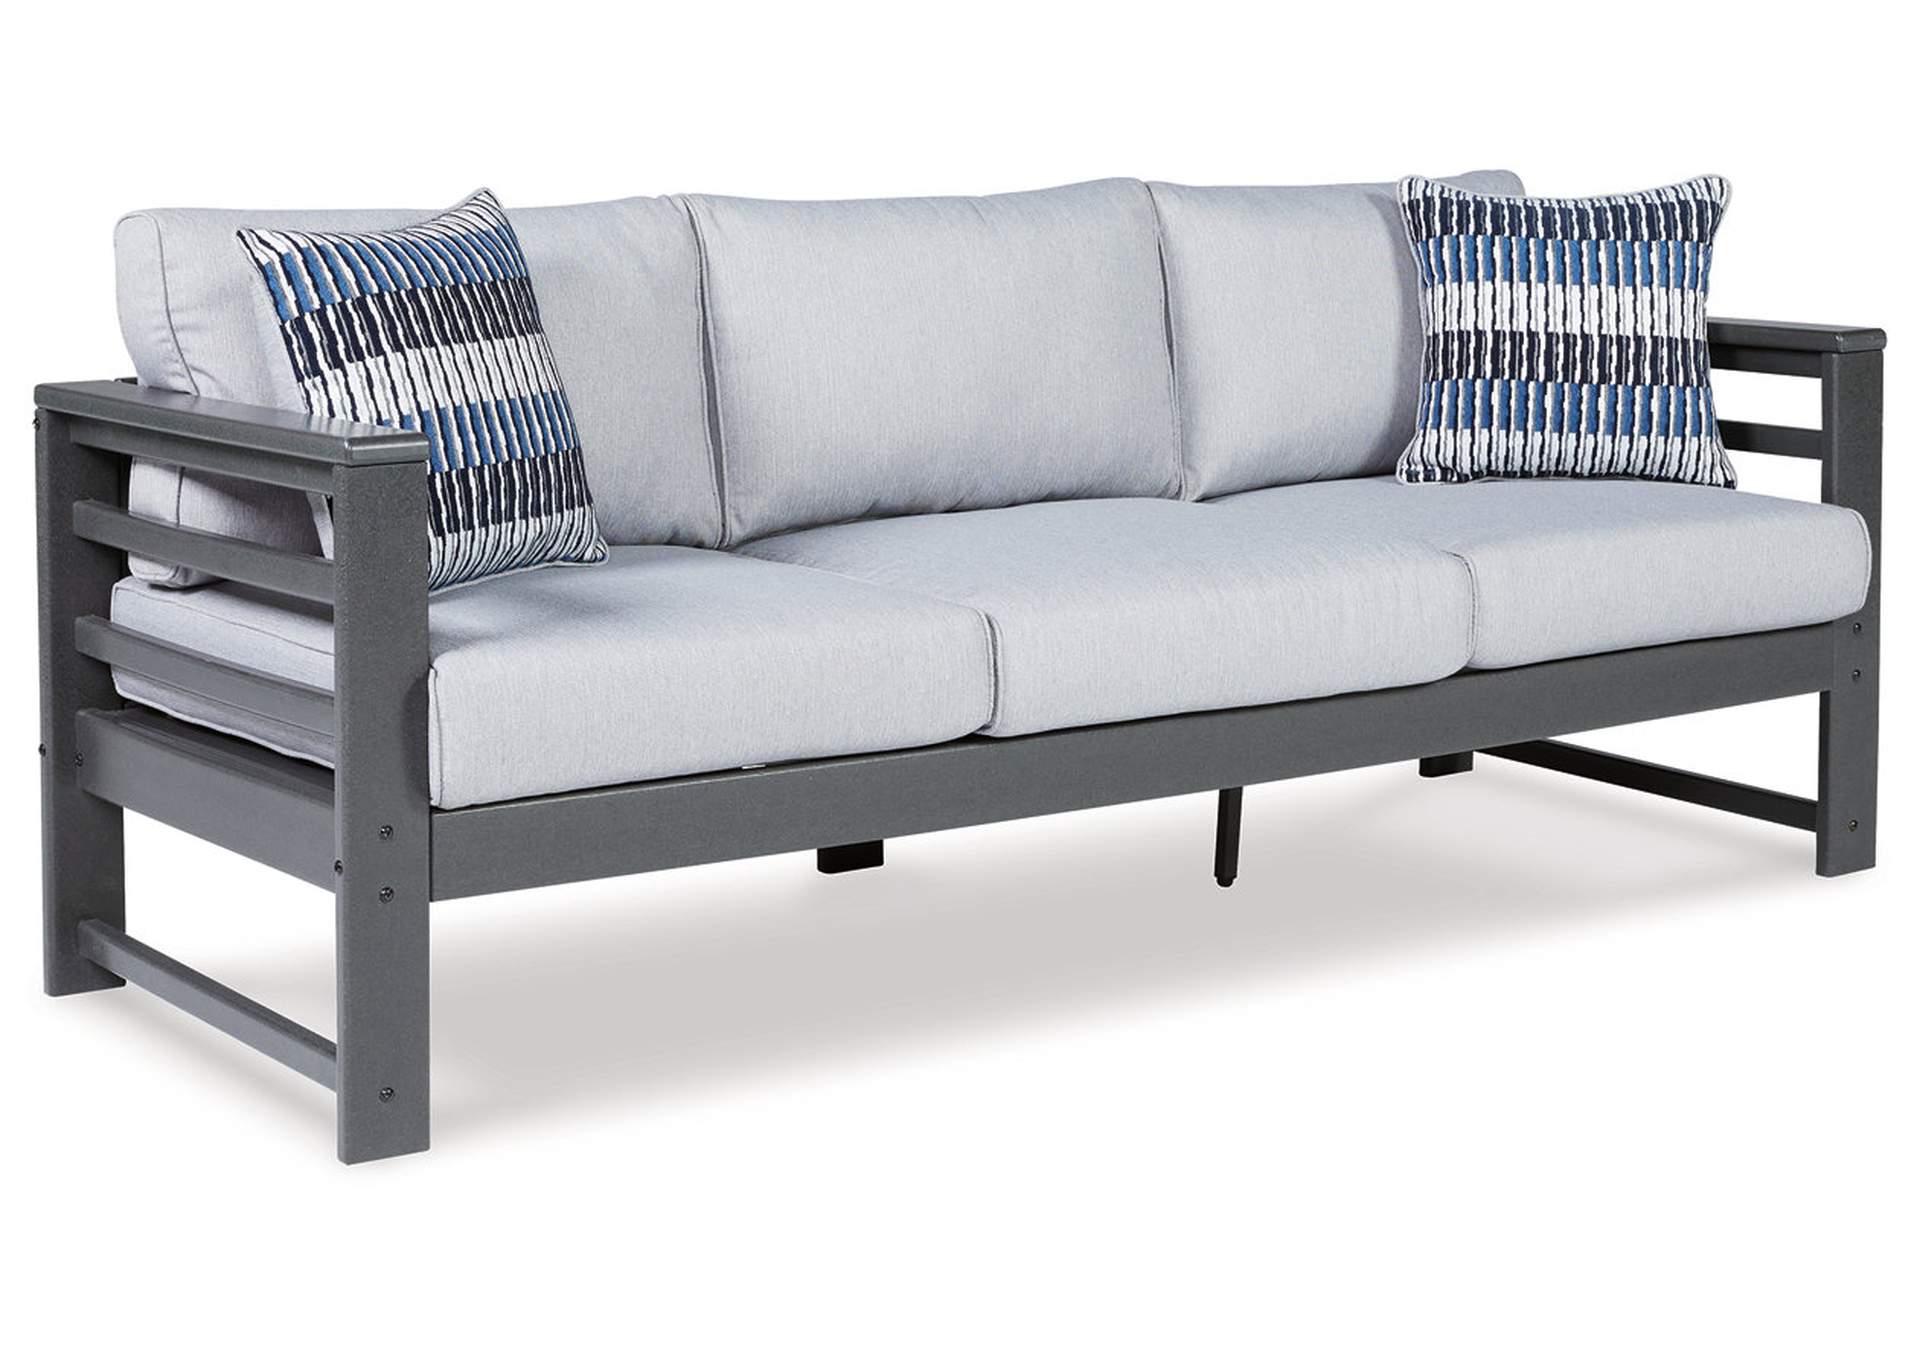 Amora Outdoor Sofa with Cushion,Outdoor By Ashley